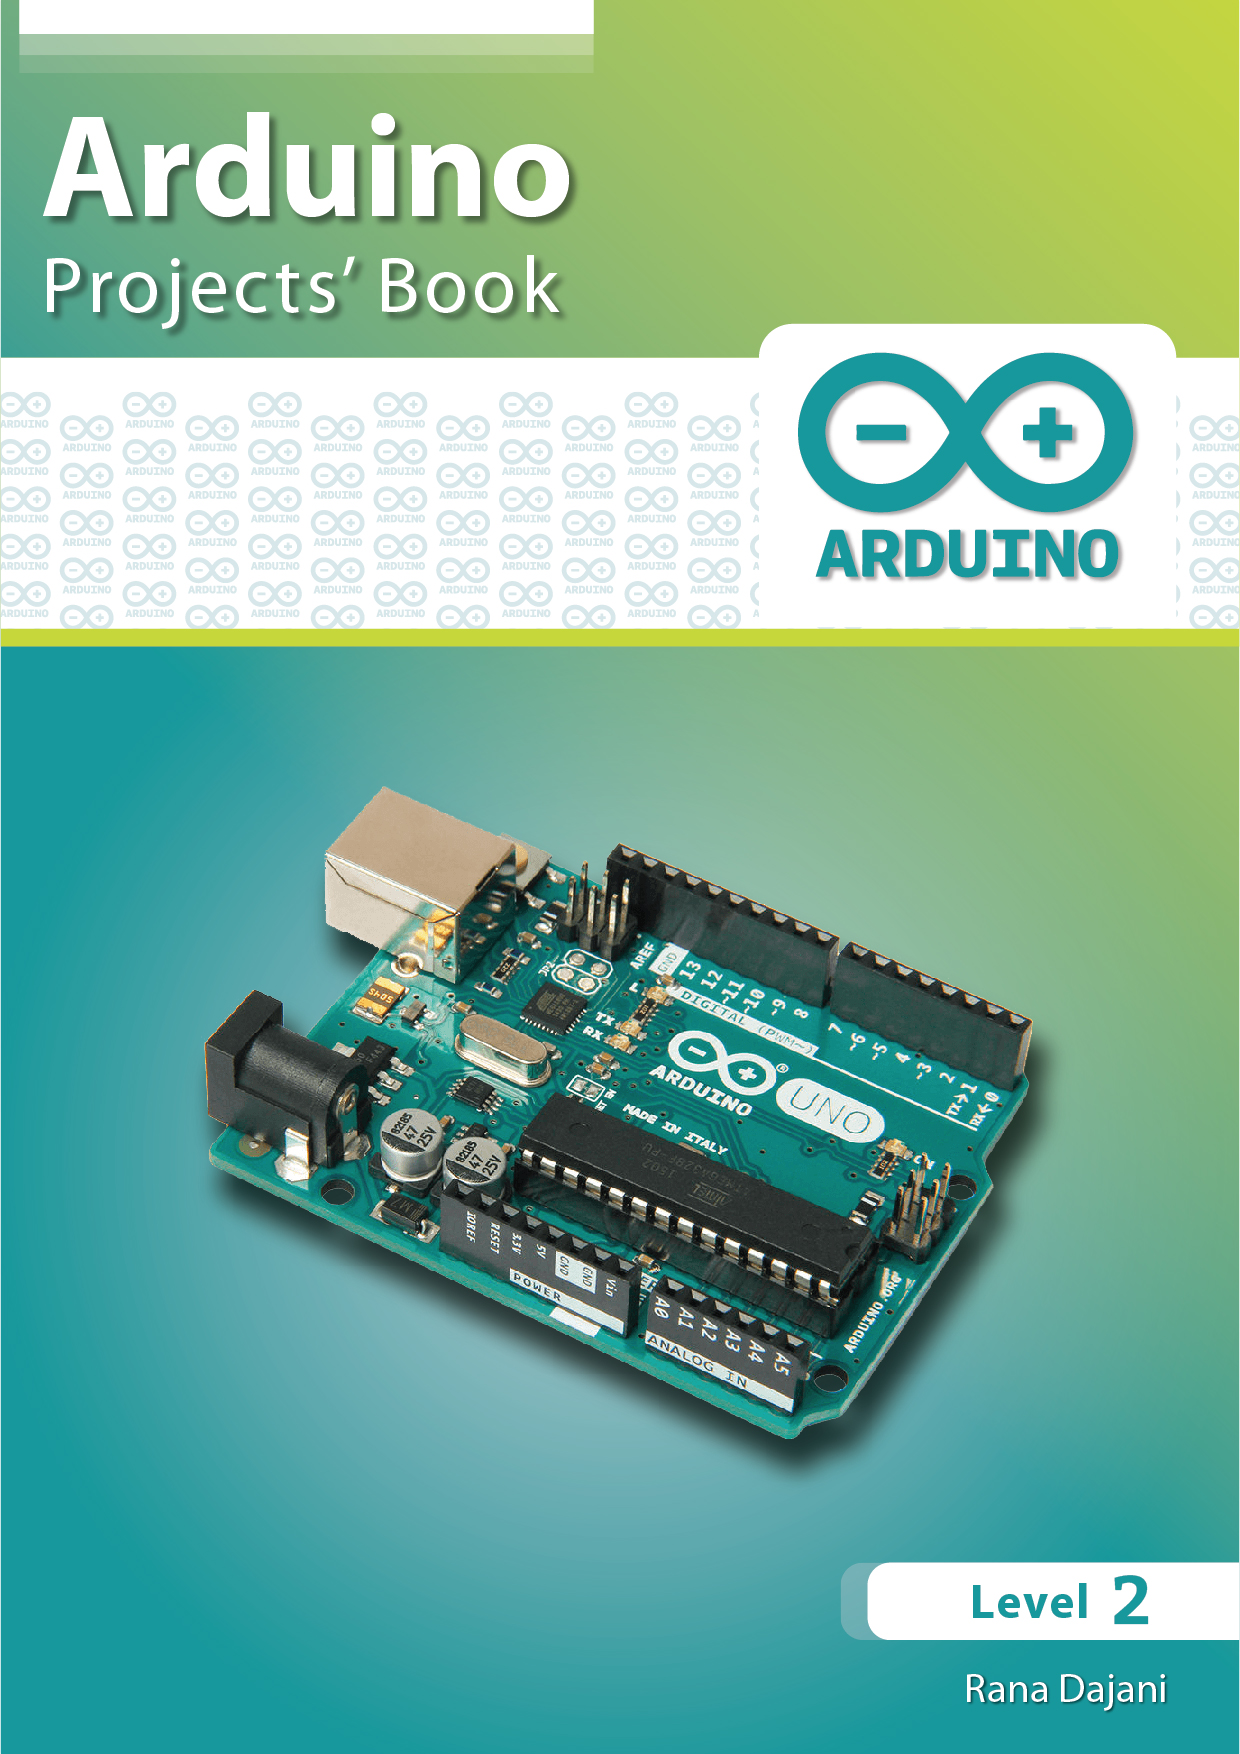 Arduino Projects Book - Level 2